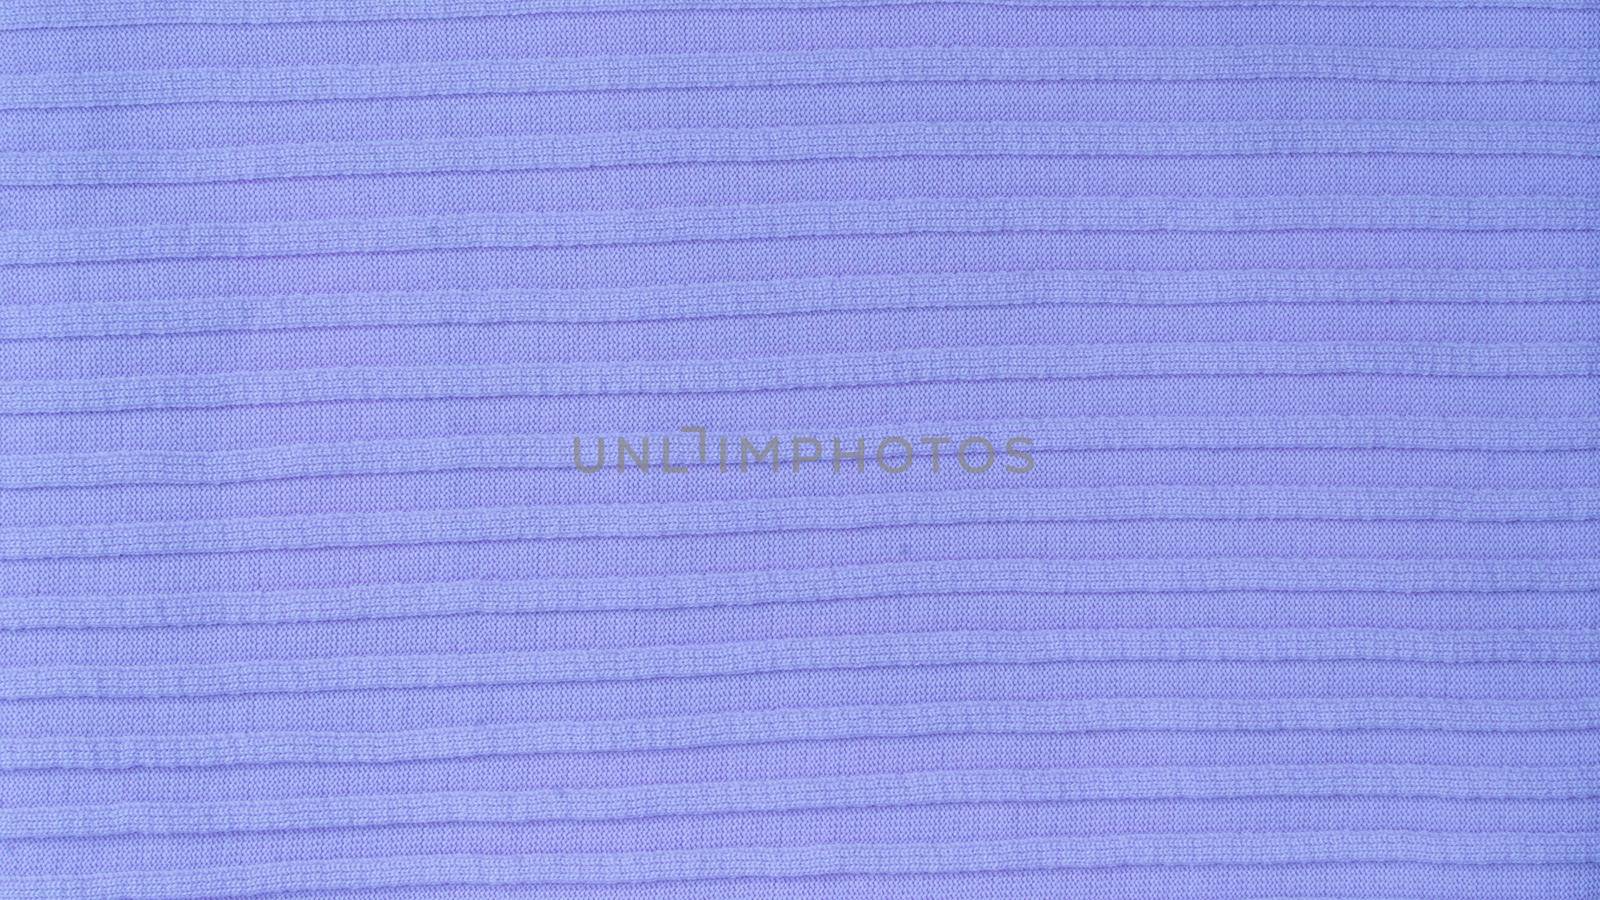 Purple fabric texture with horizontal background stripes by voktybre